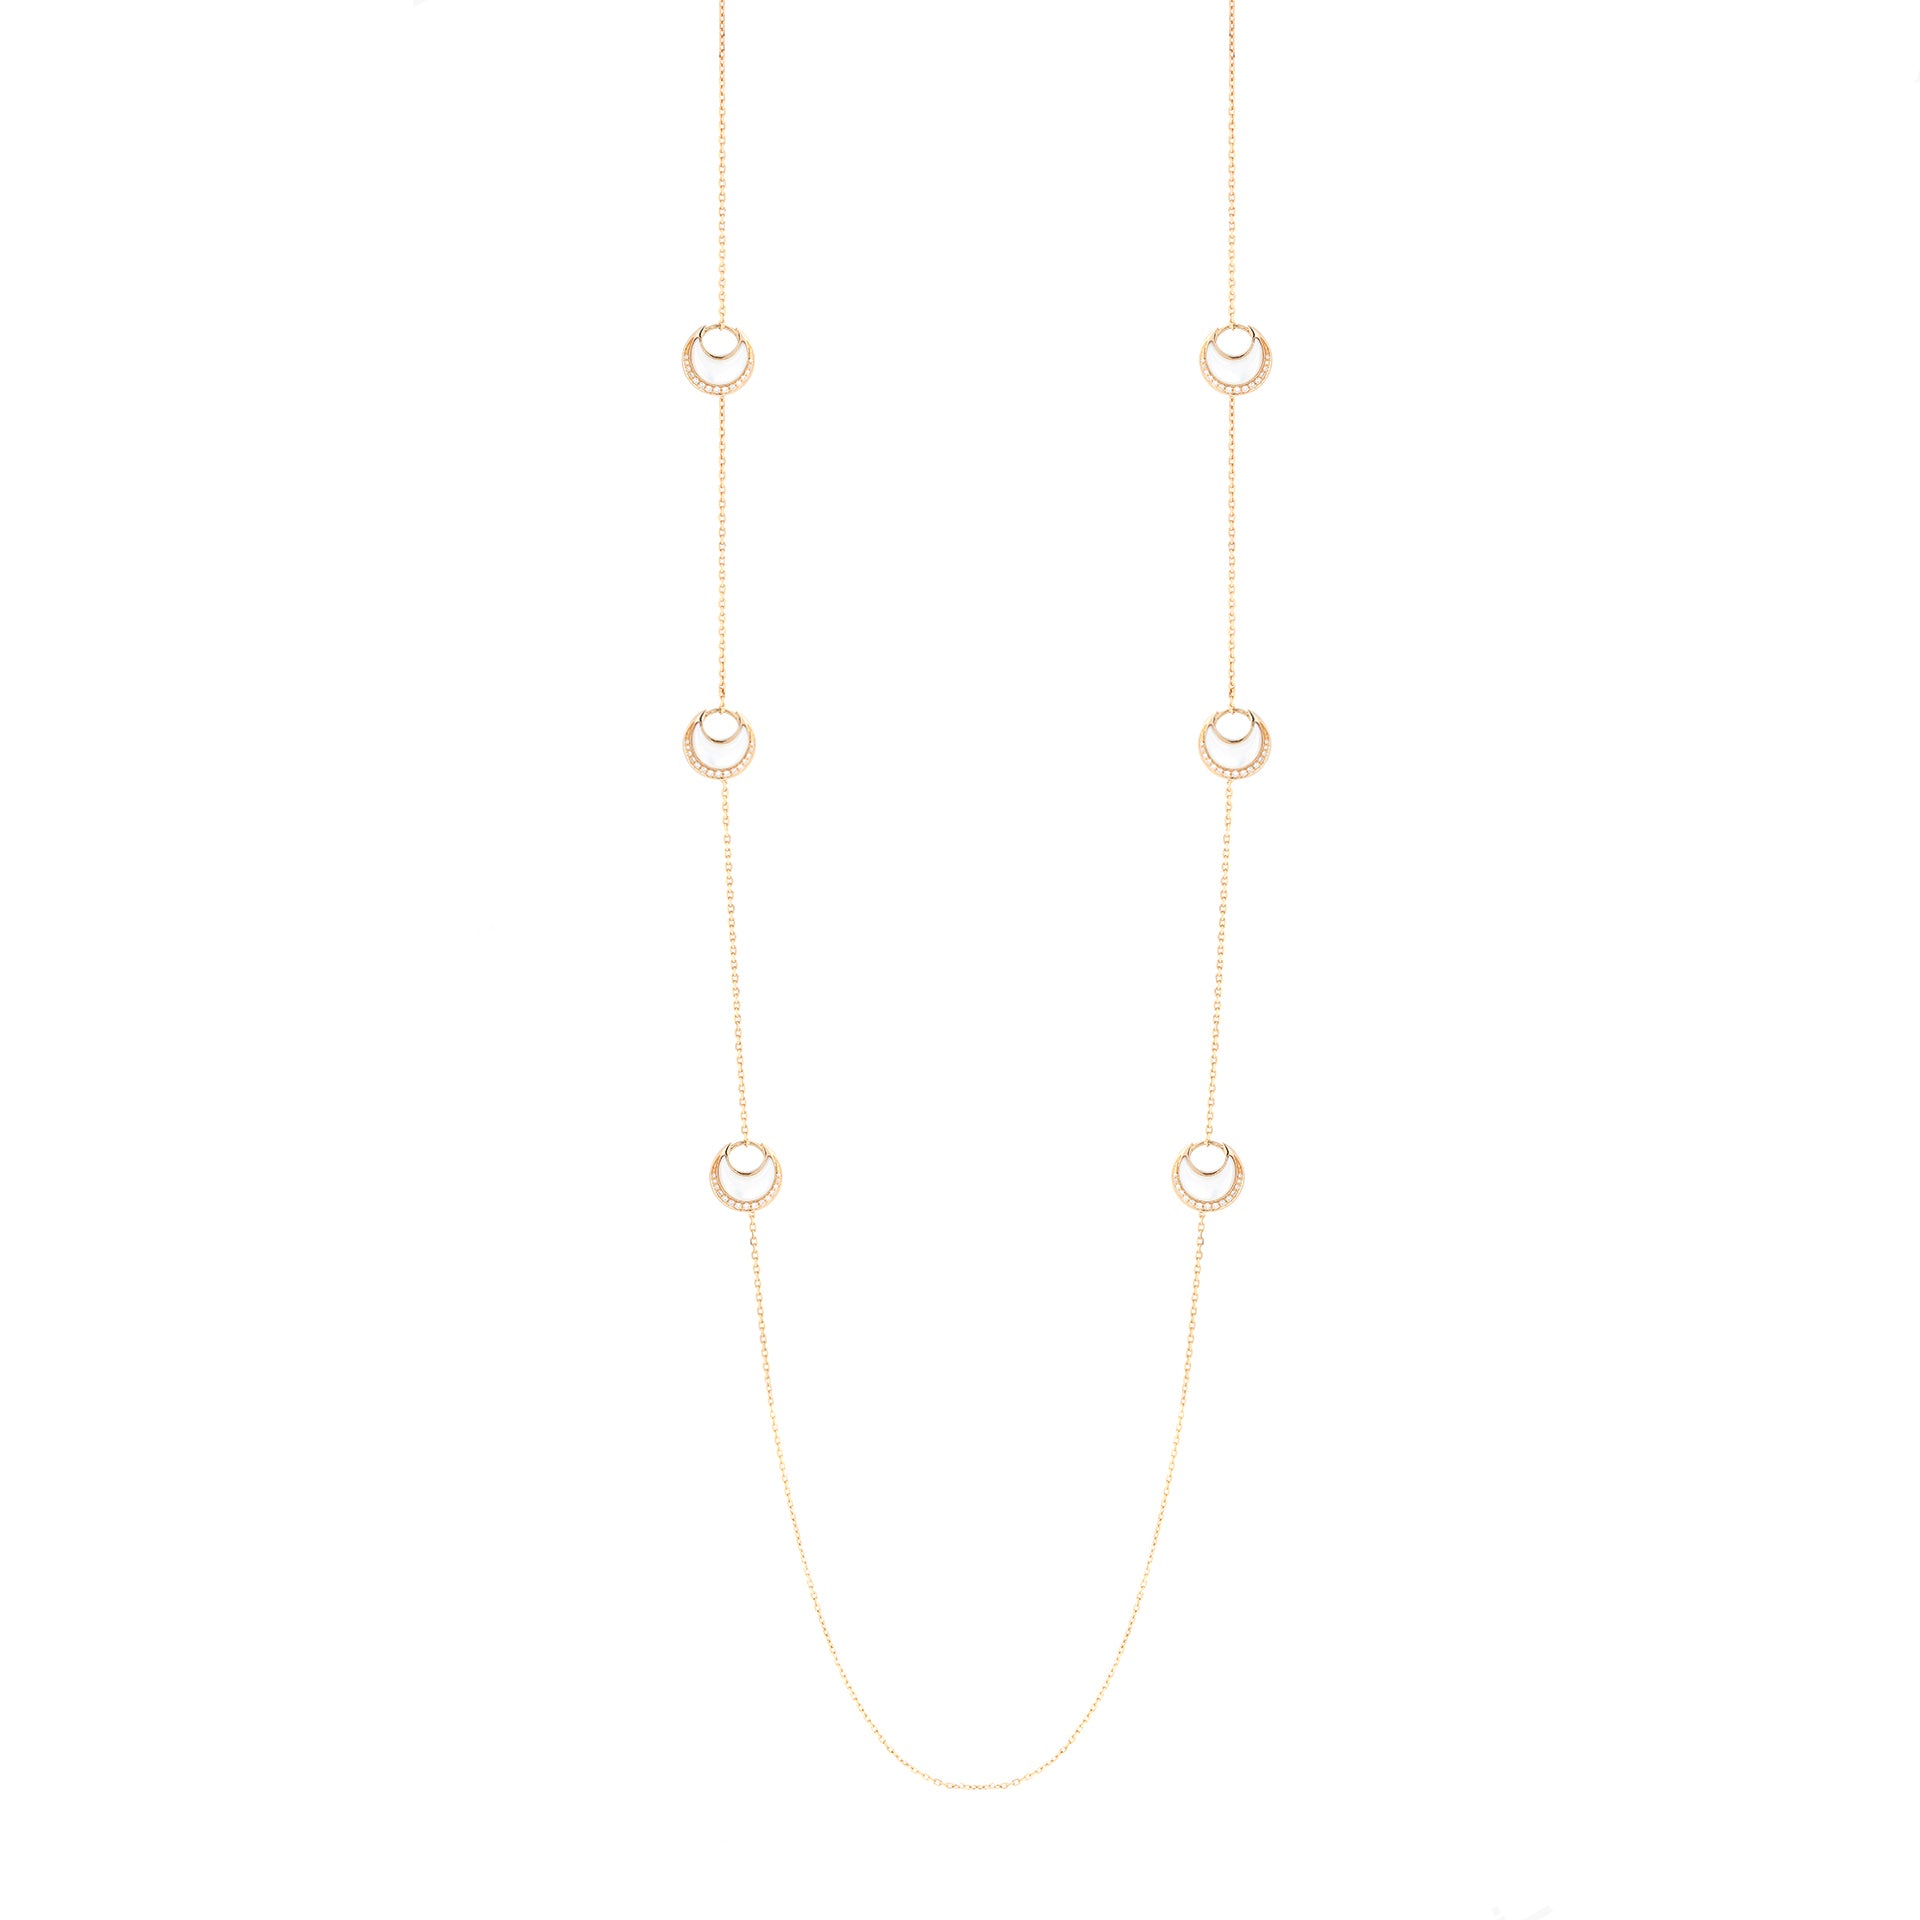 Al Hilal necklace in yellow gold with mother of pearl stones and diamonds